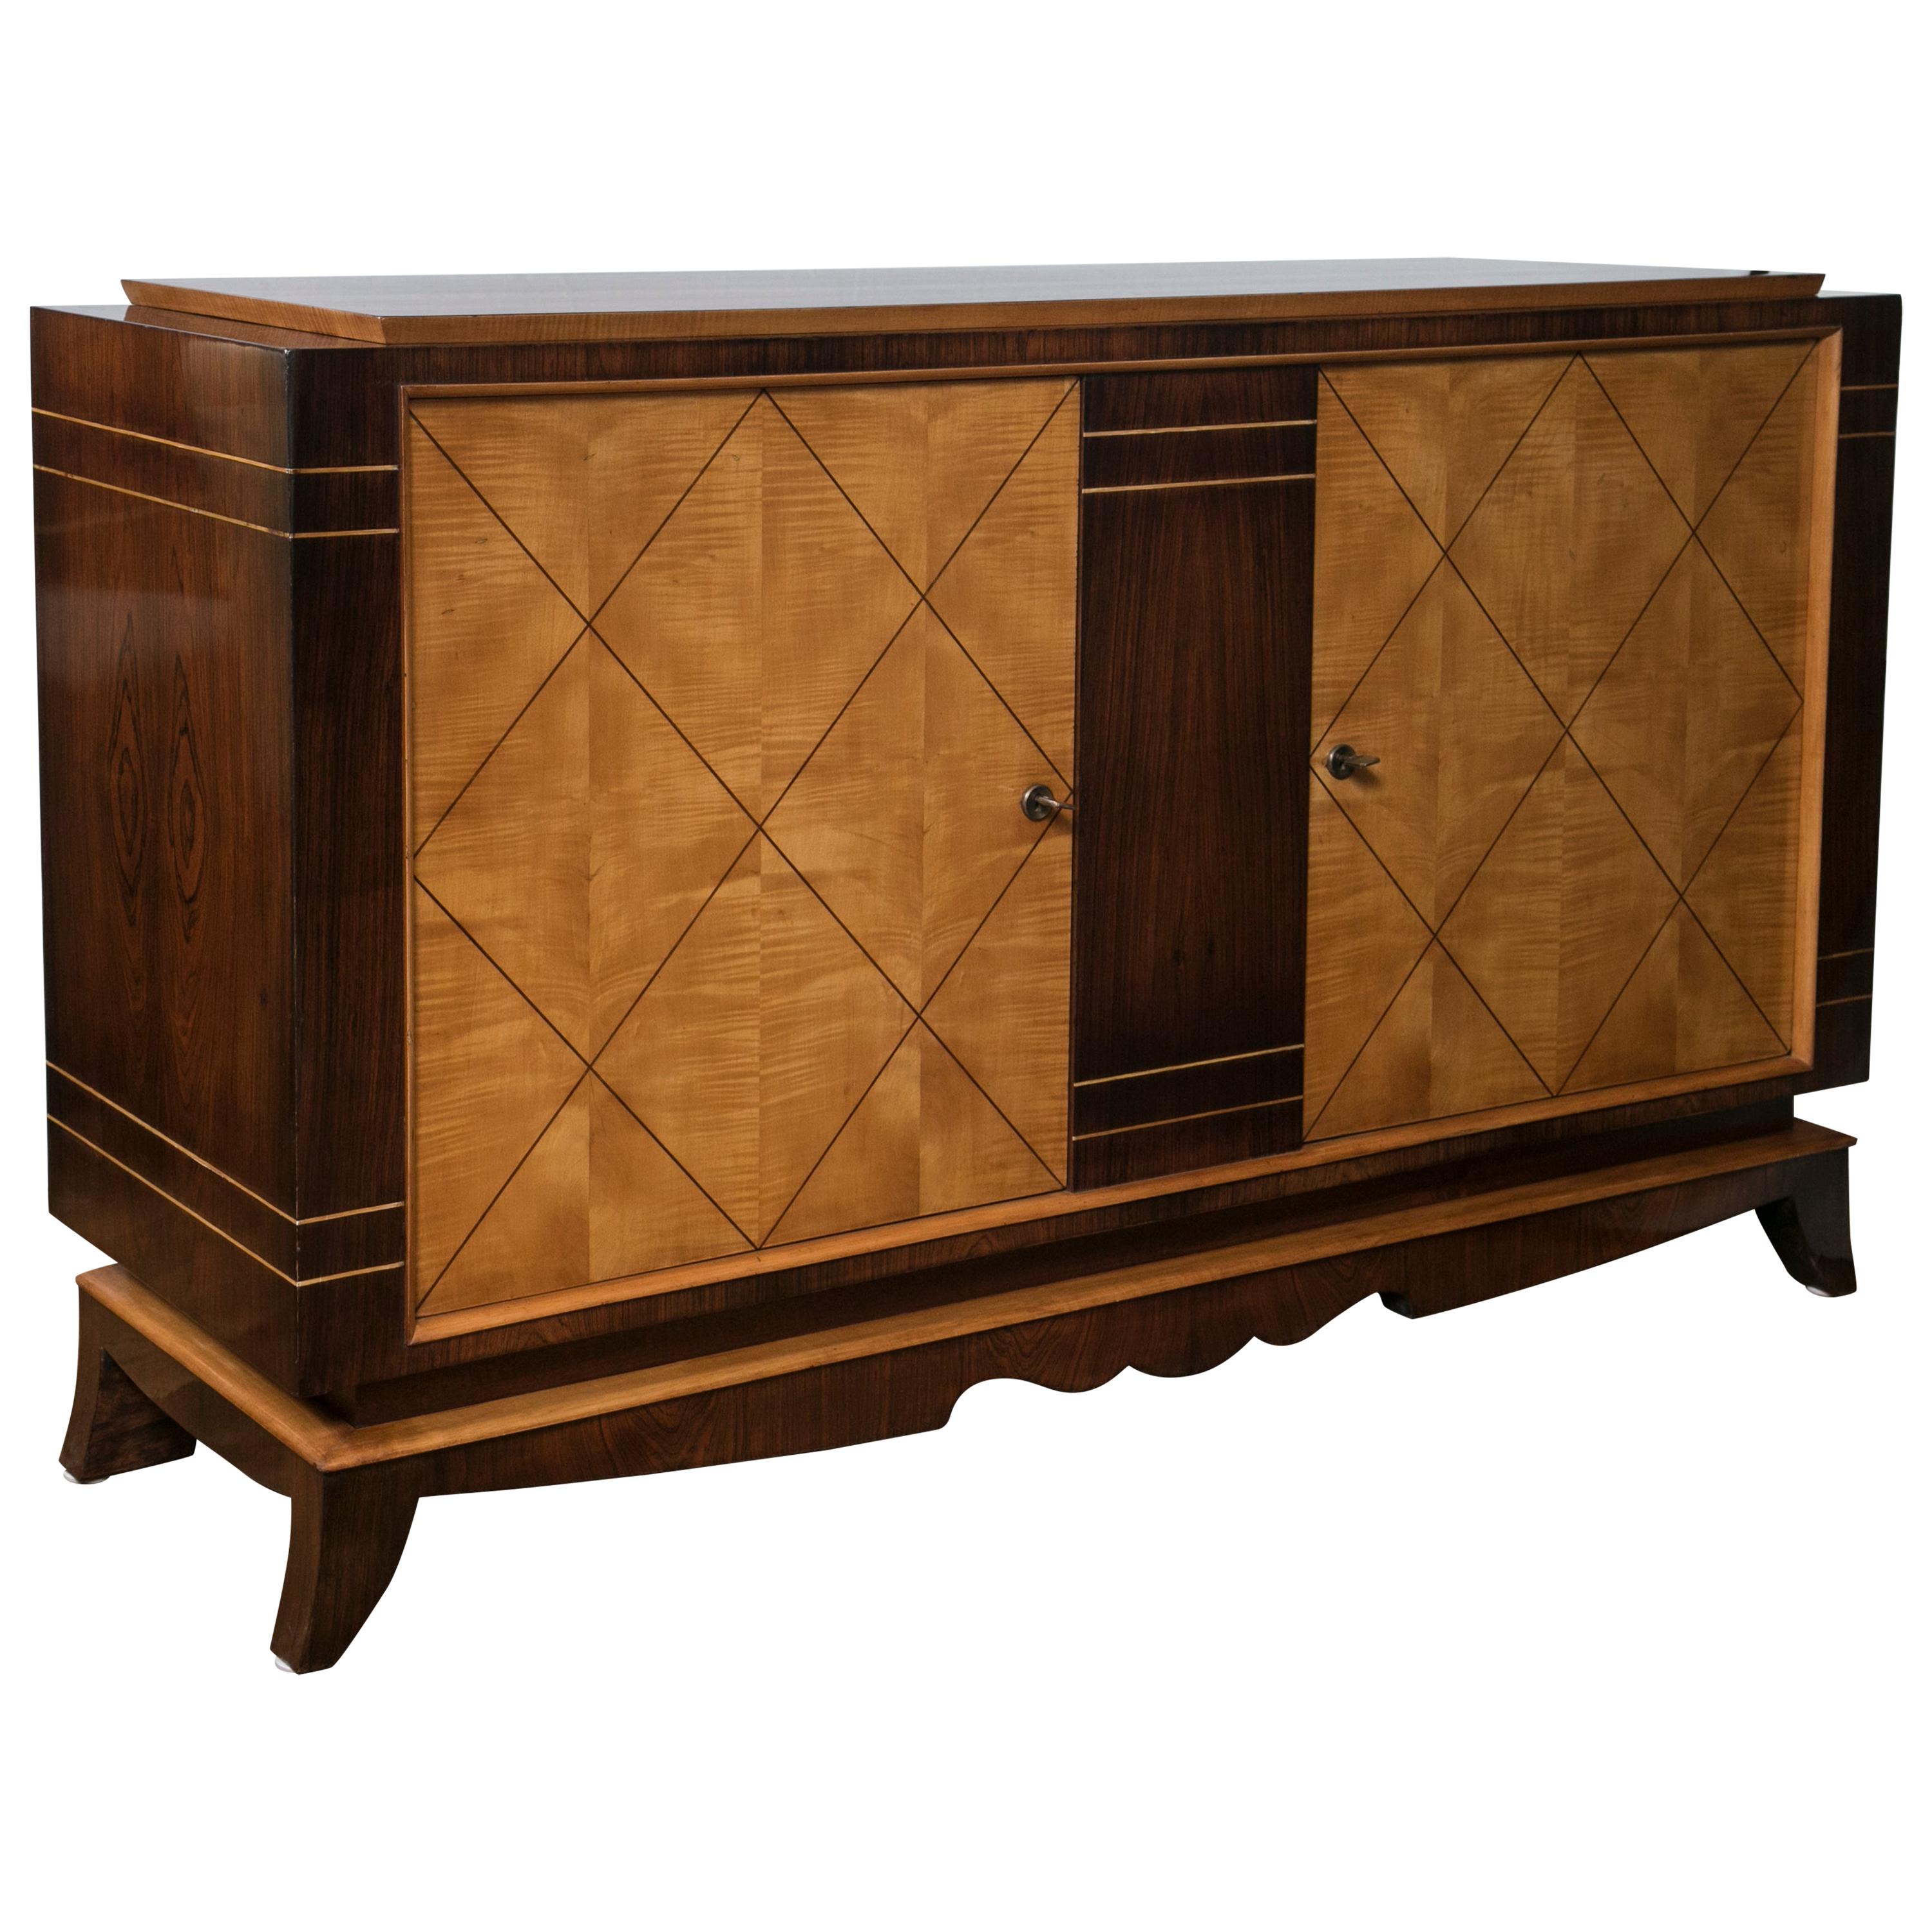 French Modernist Sideboard